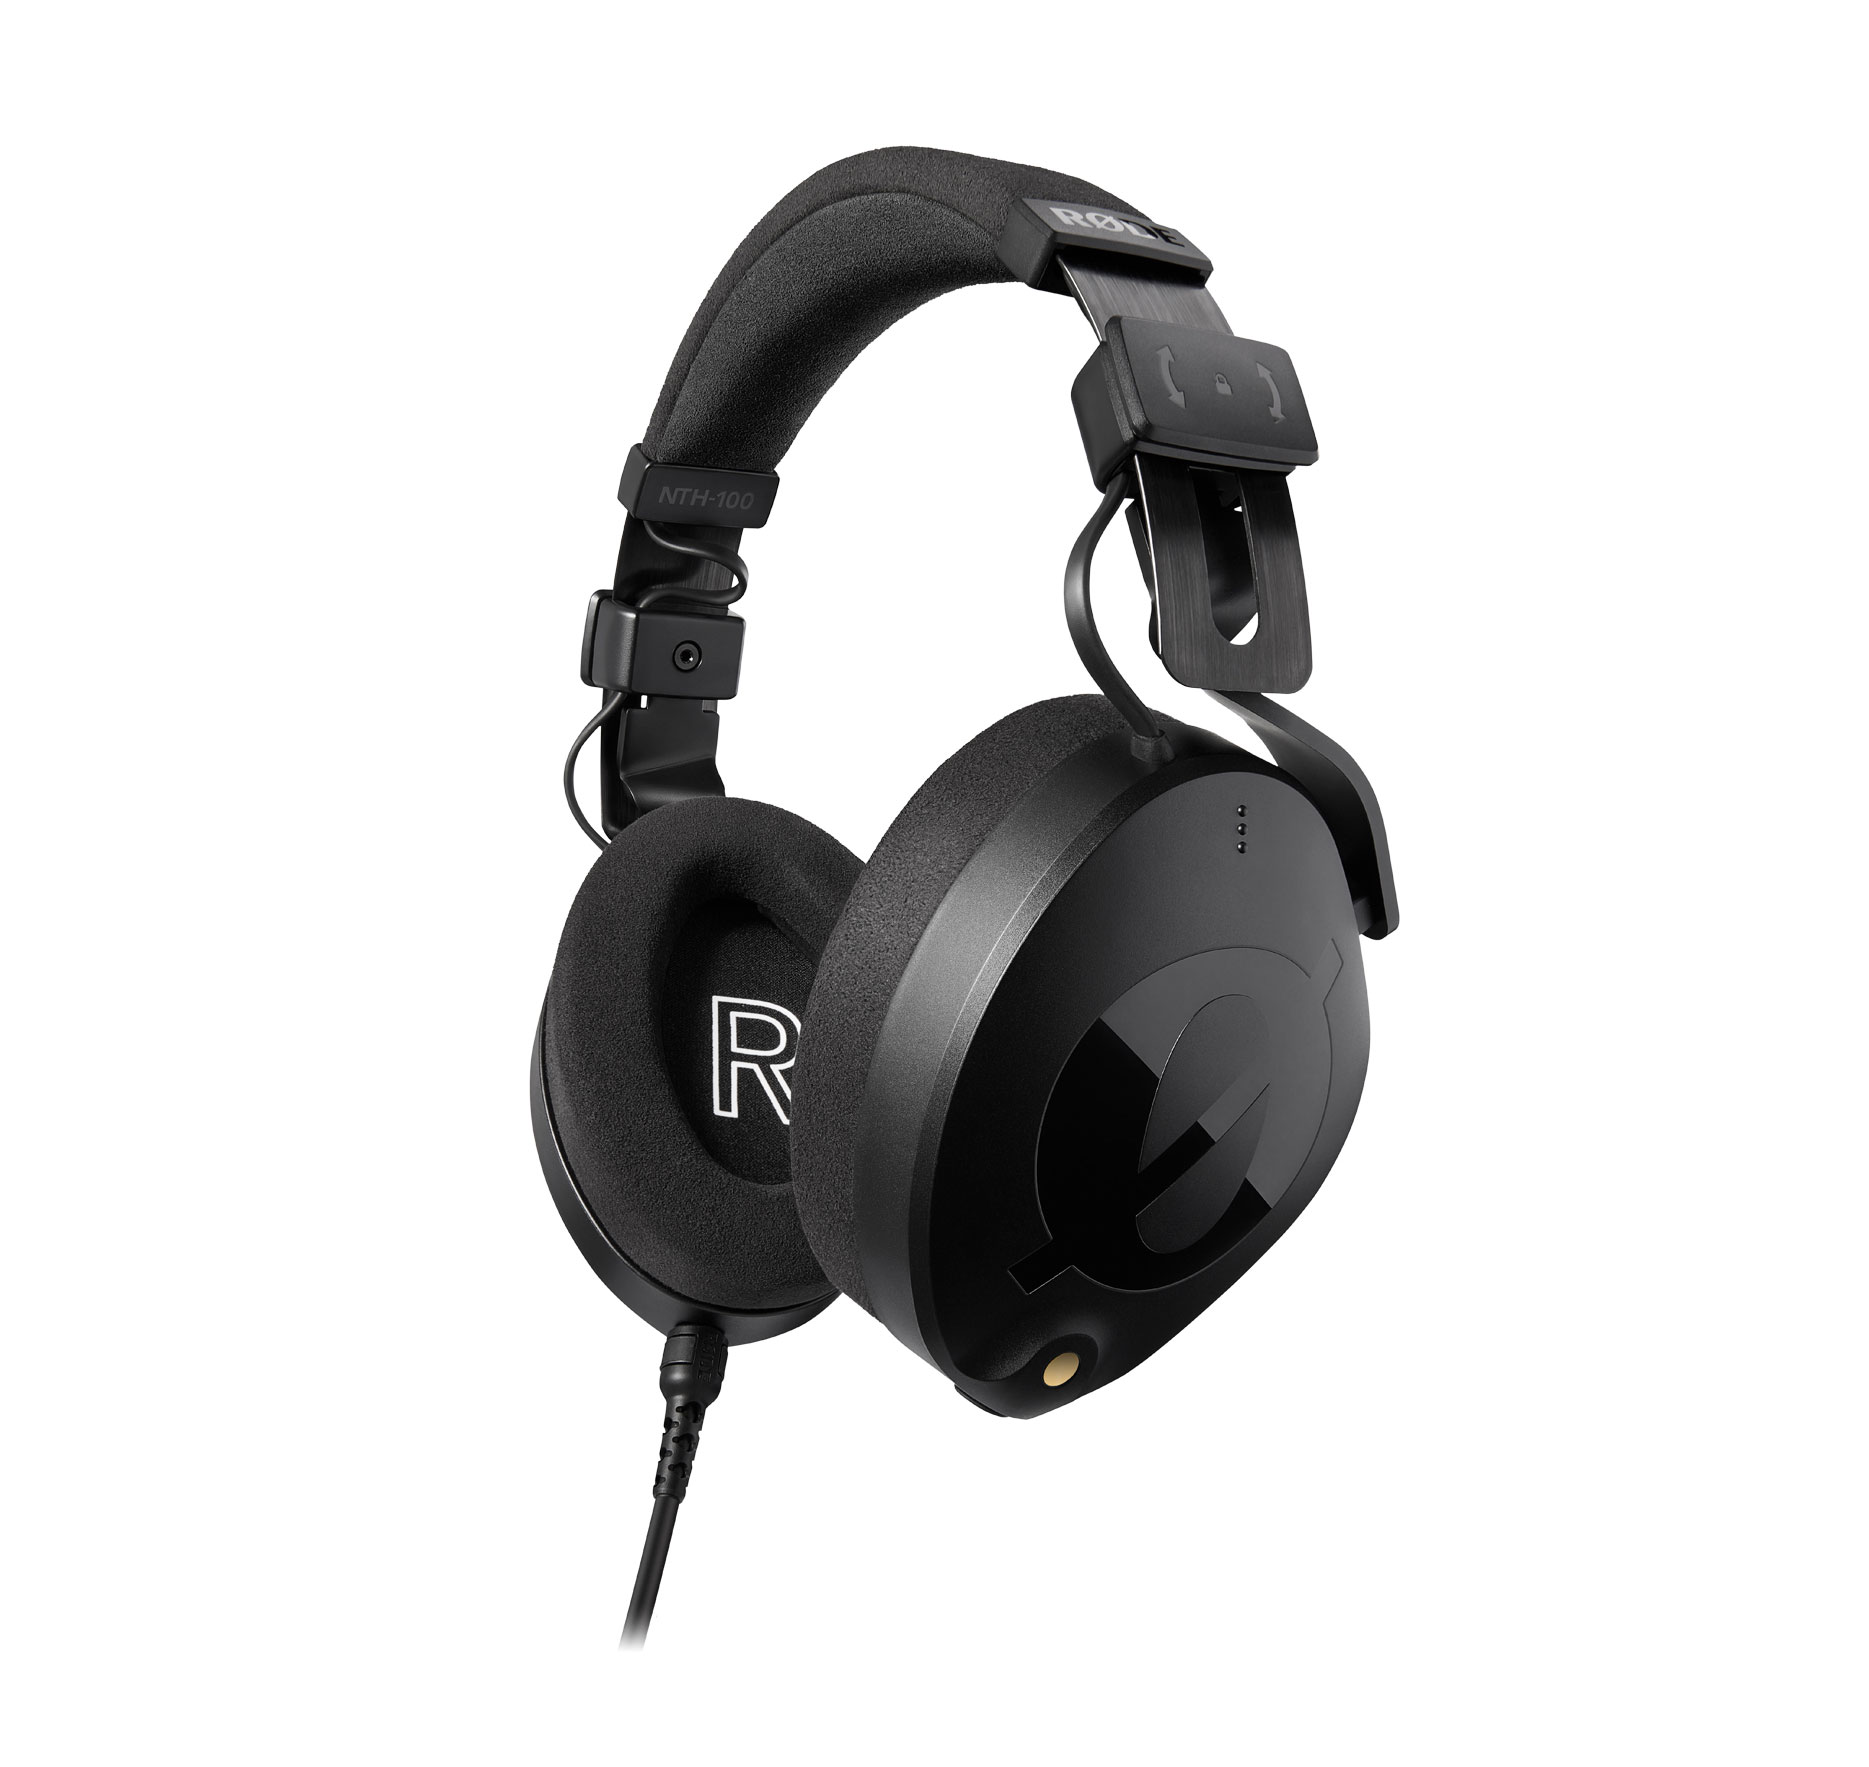 Rode NTH-100: First professional studio headphones for audio monitoring, filmmaking and more. 